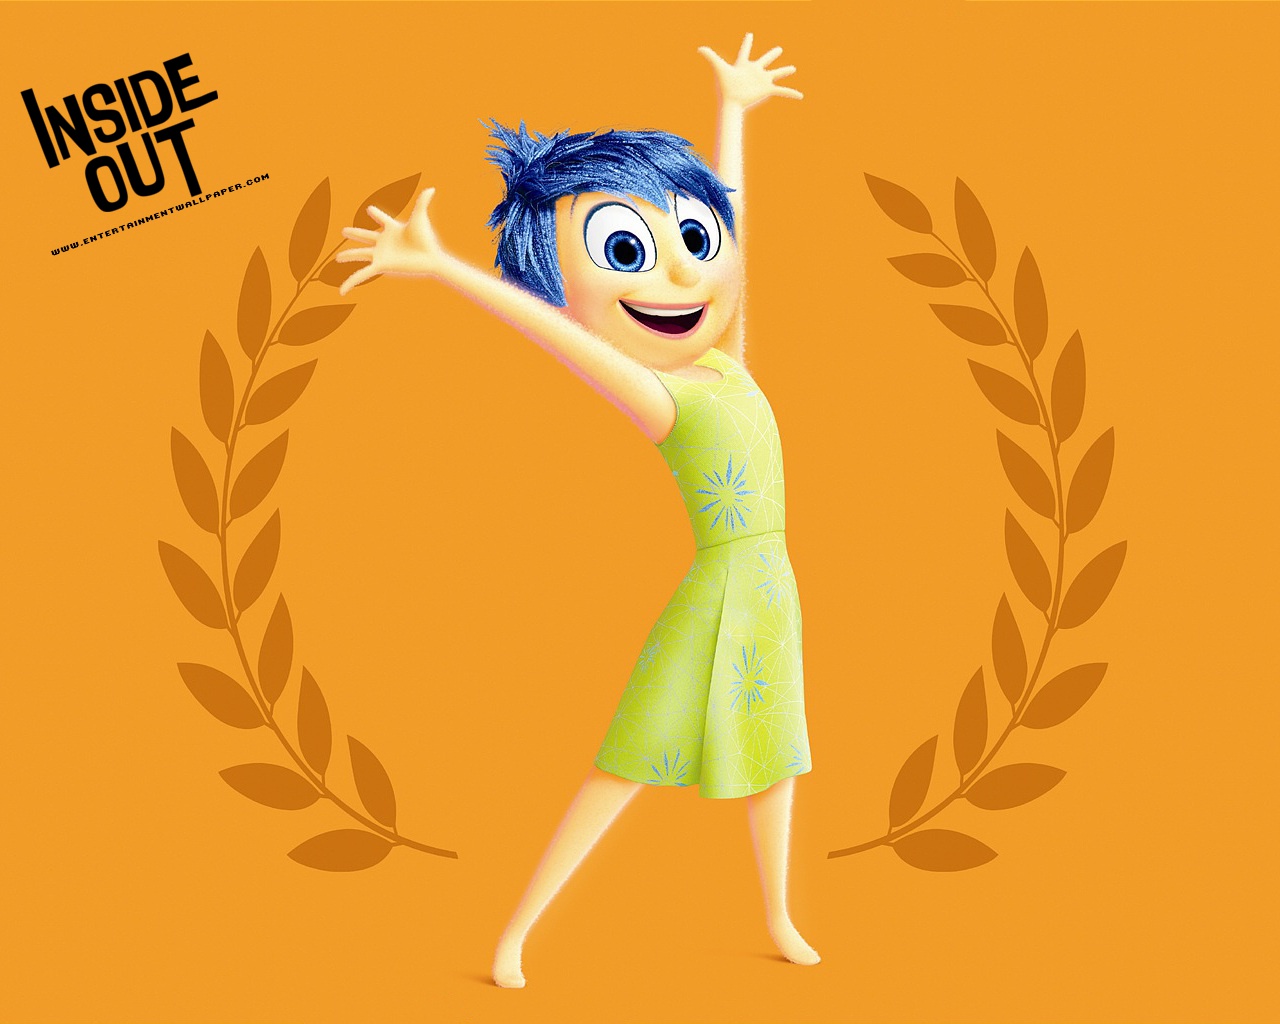  inside out 2015 wallpaper 10046219 size 1280x1024 more inside out 2015